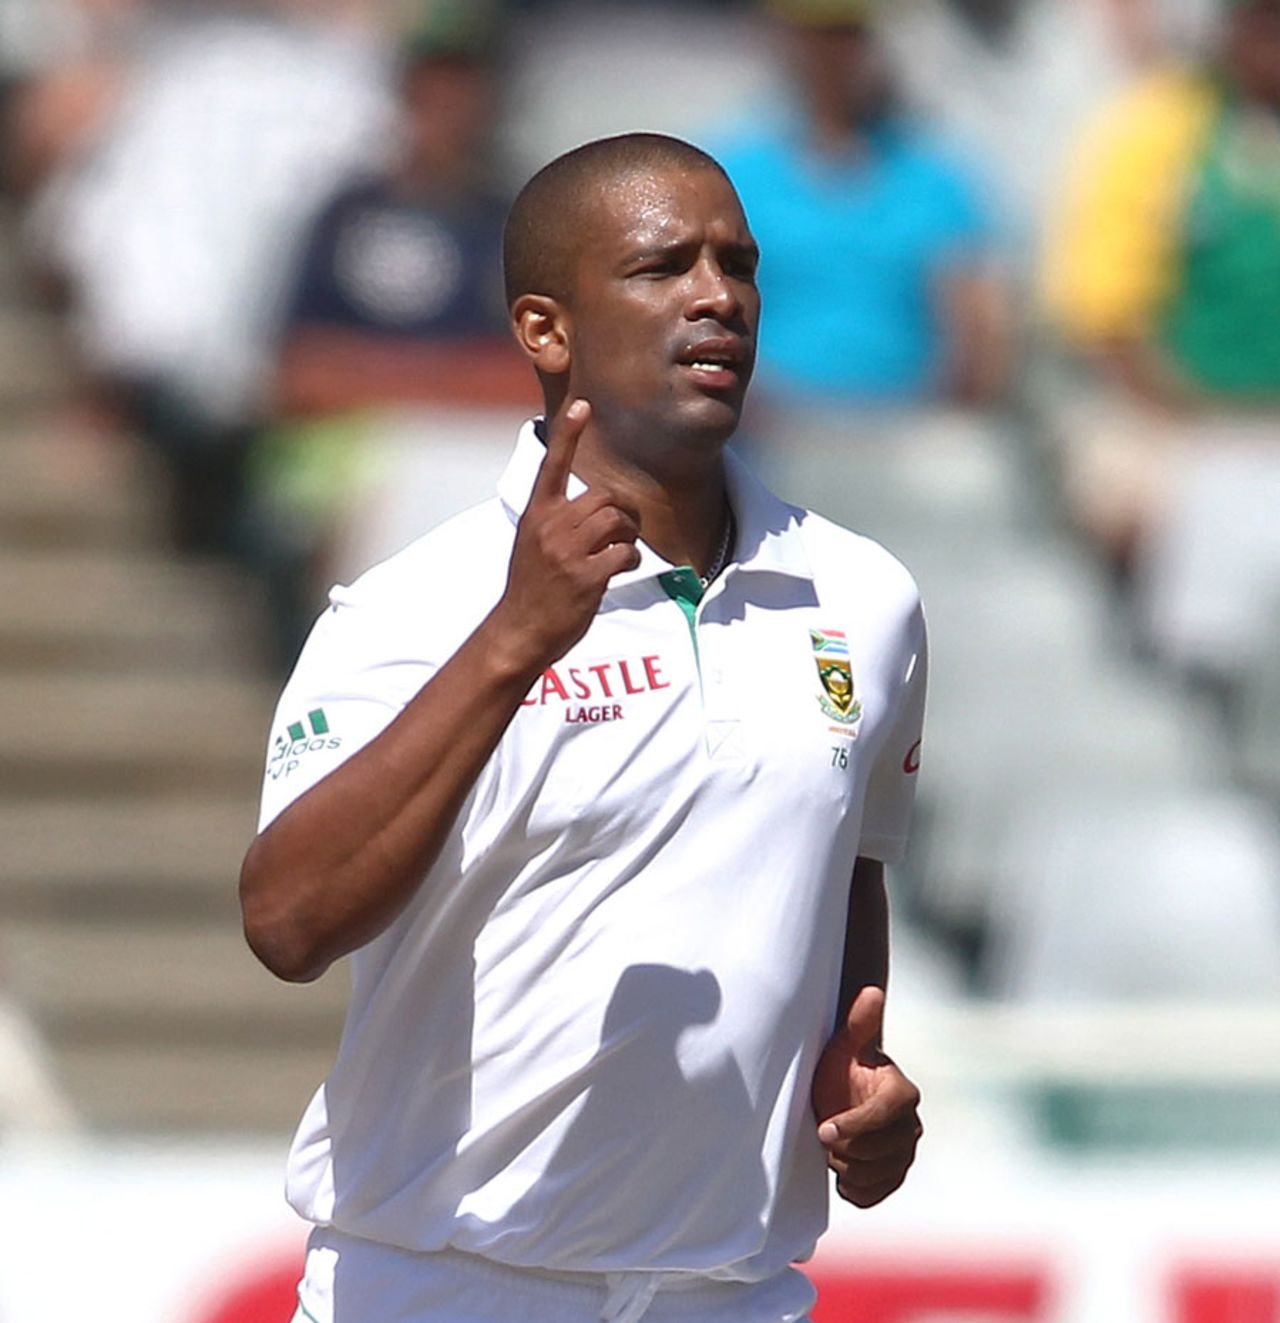 Vernon Philander got his ninth Test five-for, South Africa v Pakistan, 2nd Test, Cape Town, 2nd day, February 15, 2013